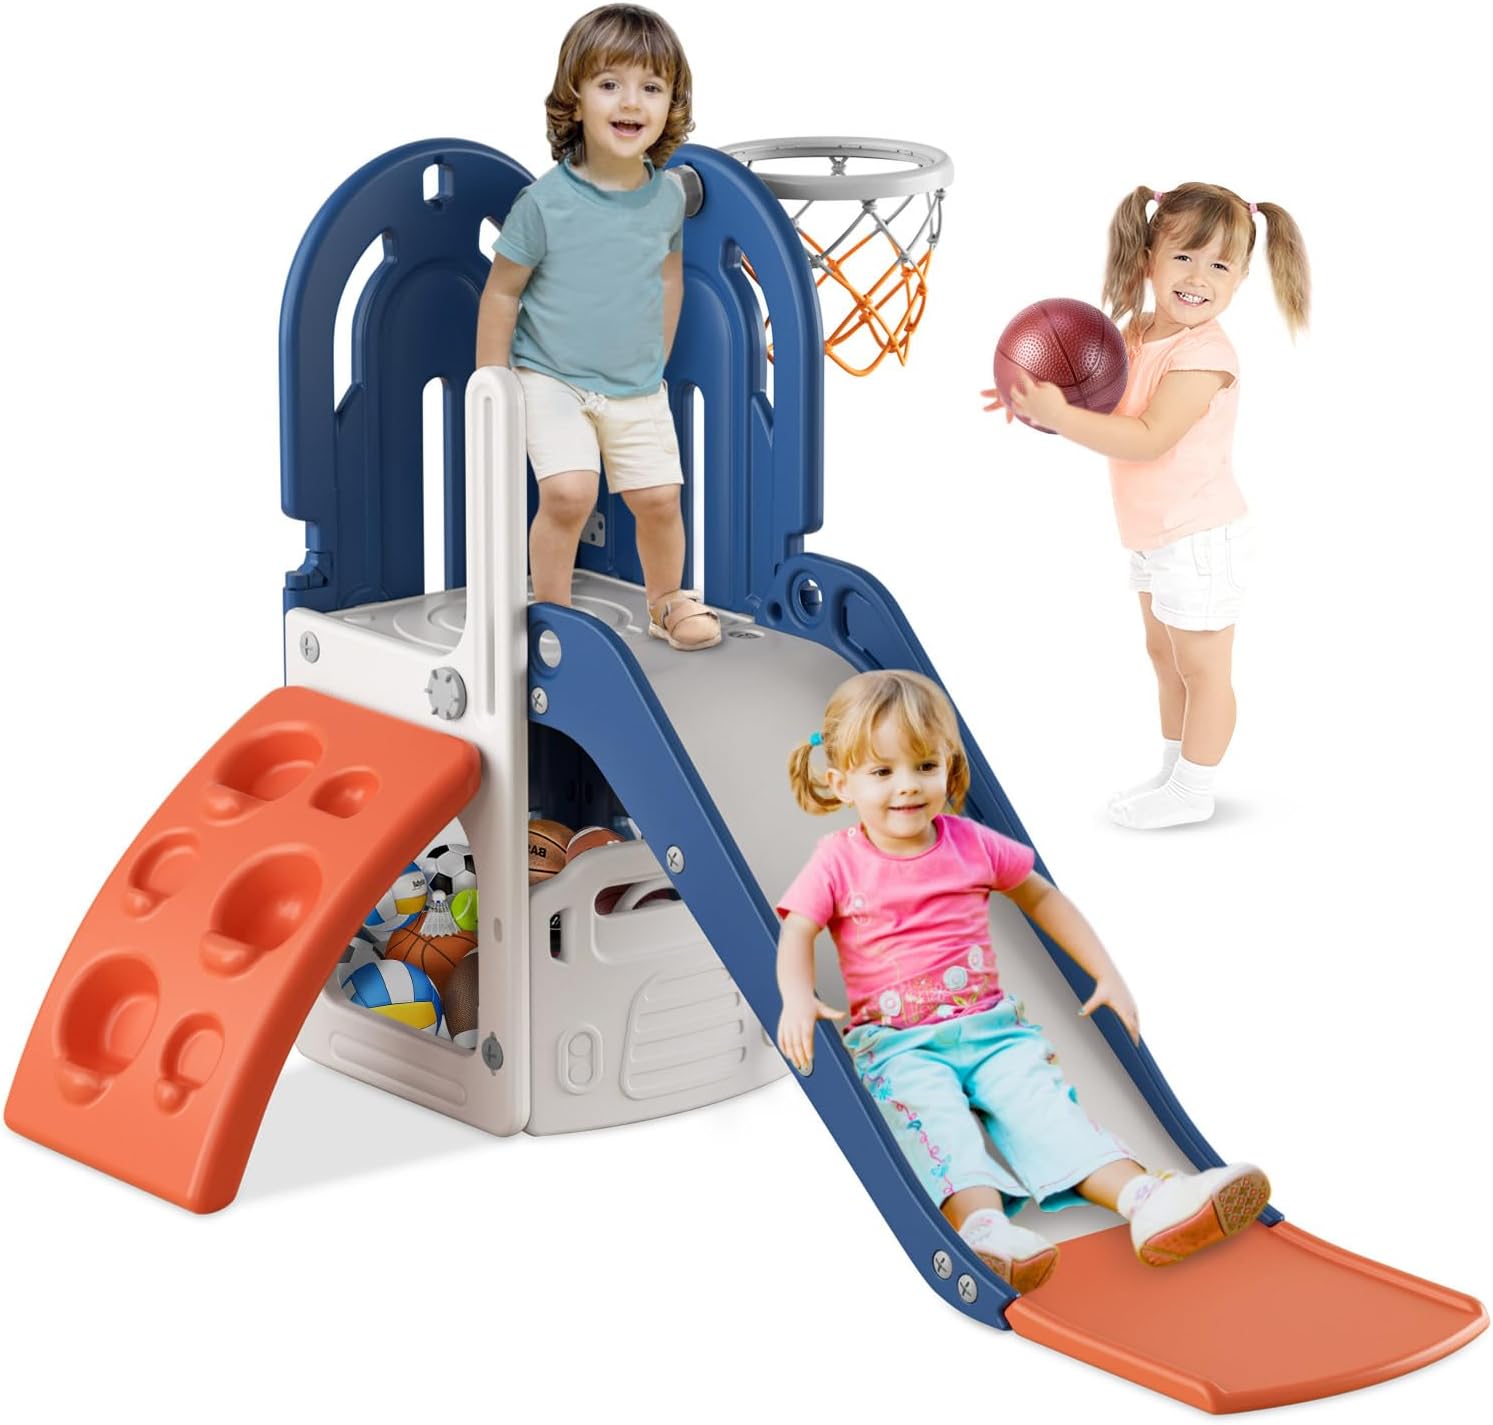 Grab Your Exclusive Discount Now! BIERUM 4 in 1 Toddler Slide - Save 40% Today!